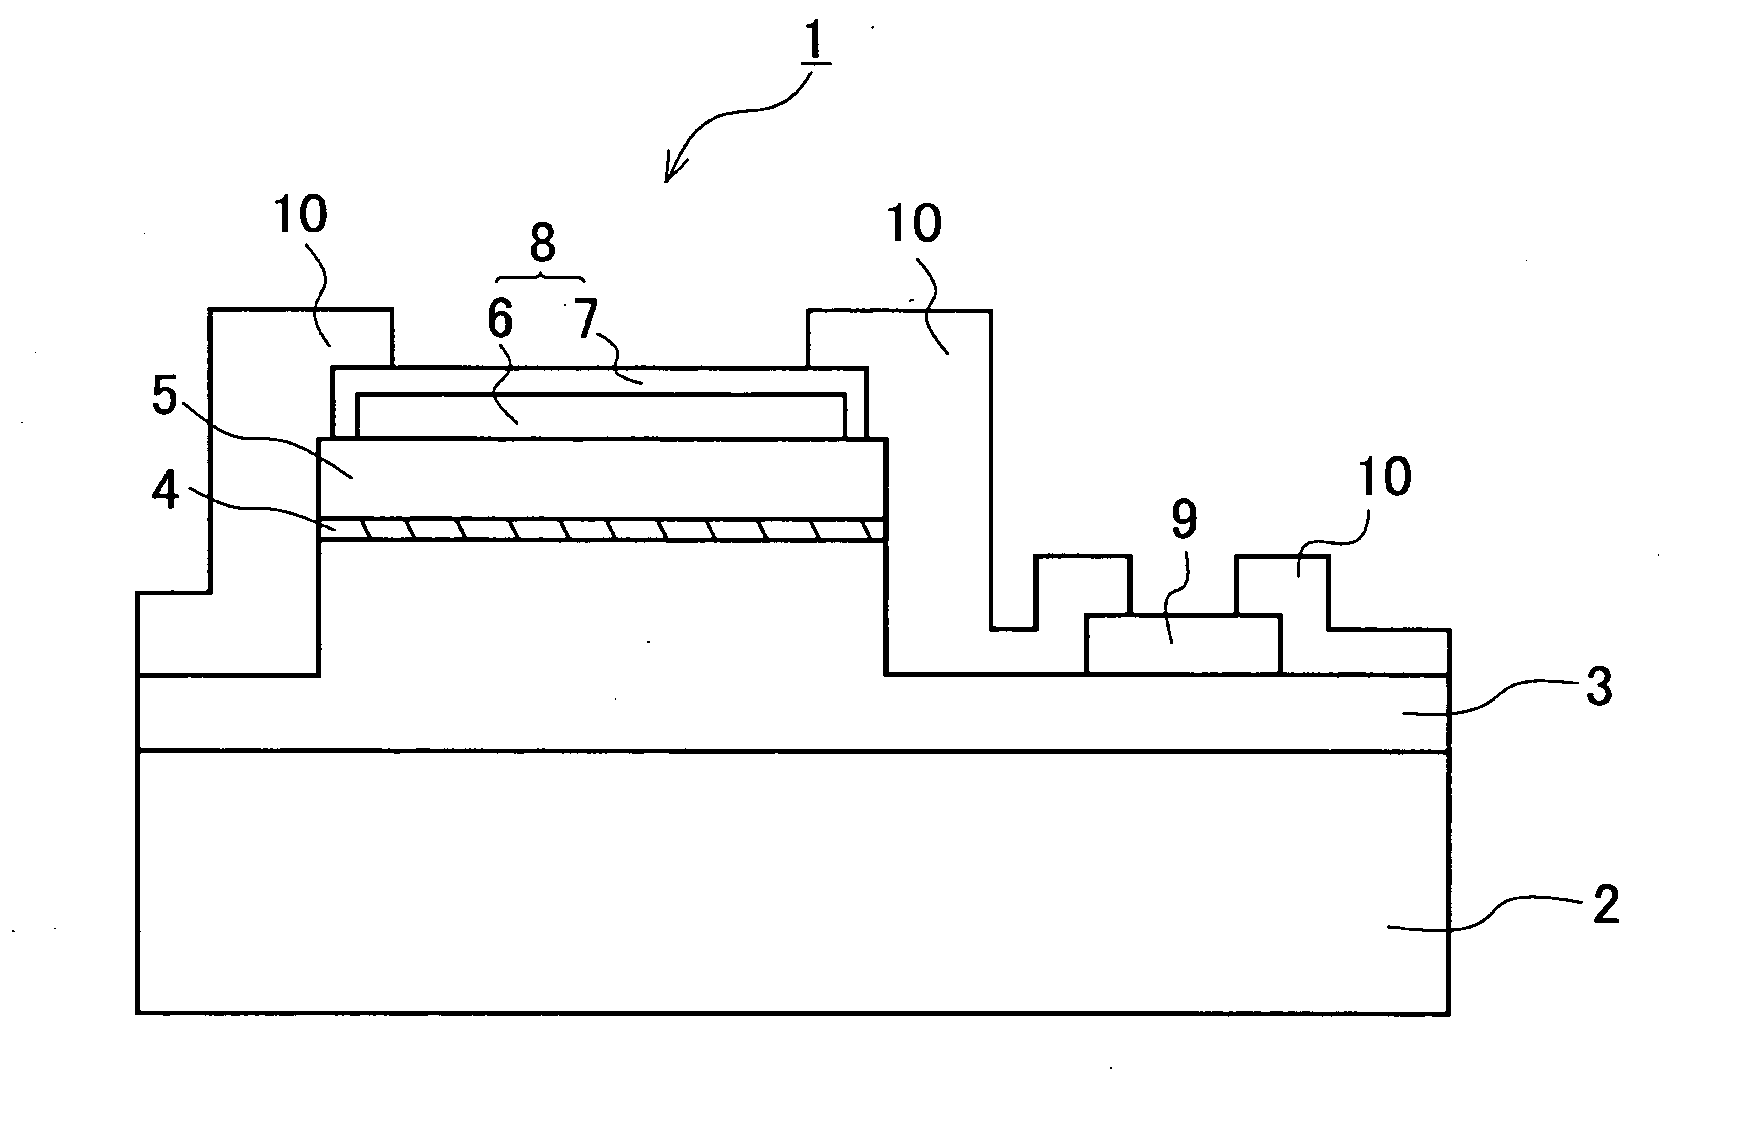 Semiconductor element